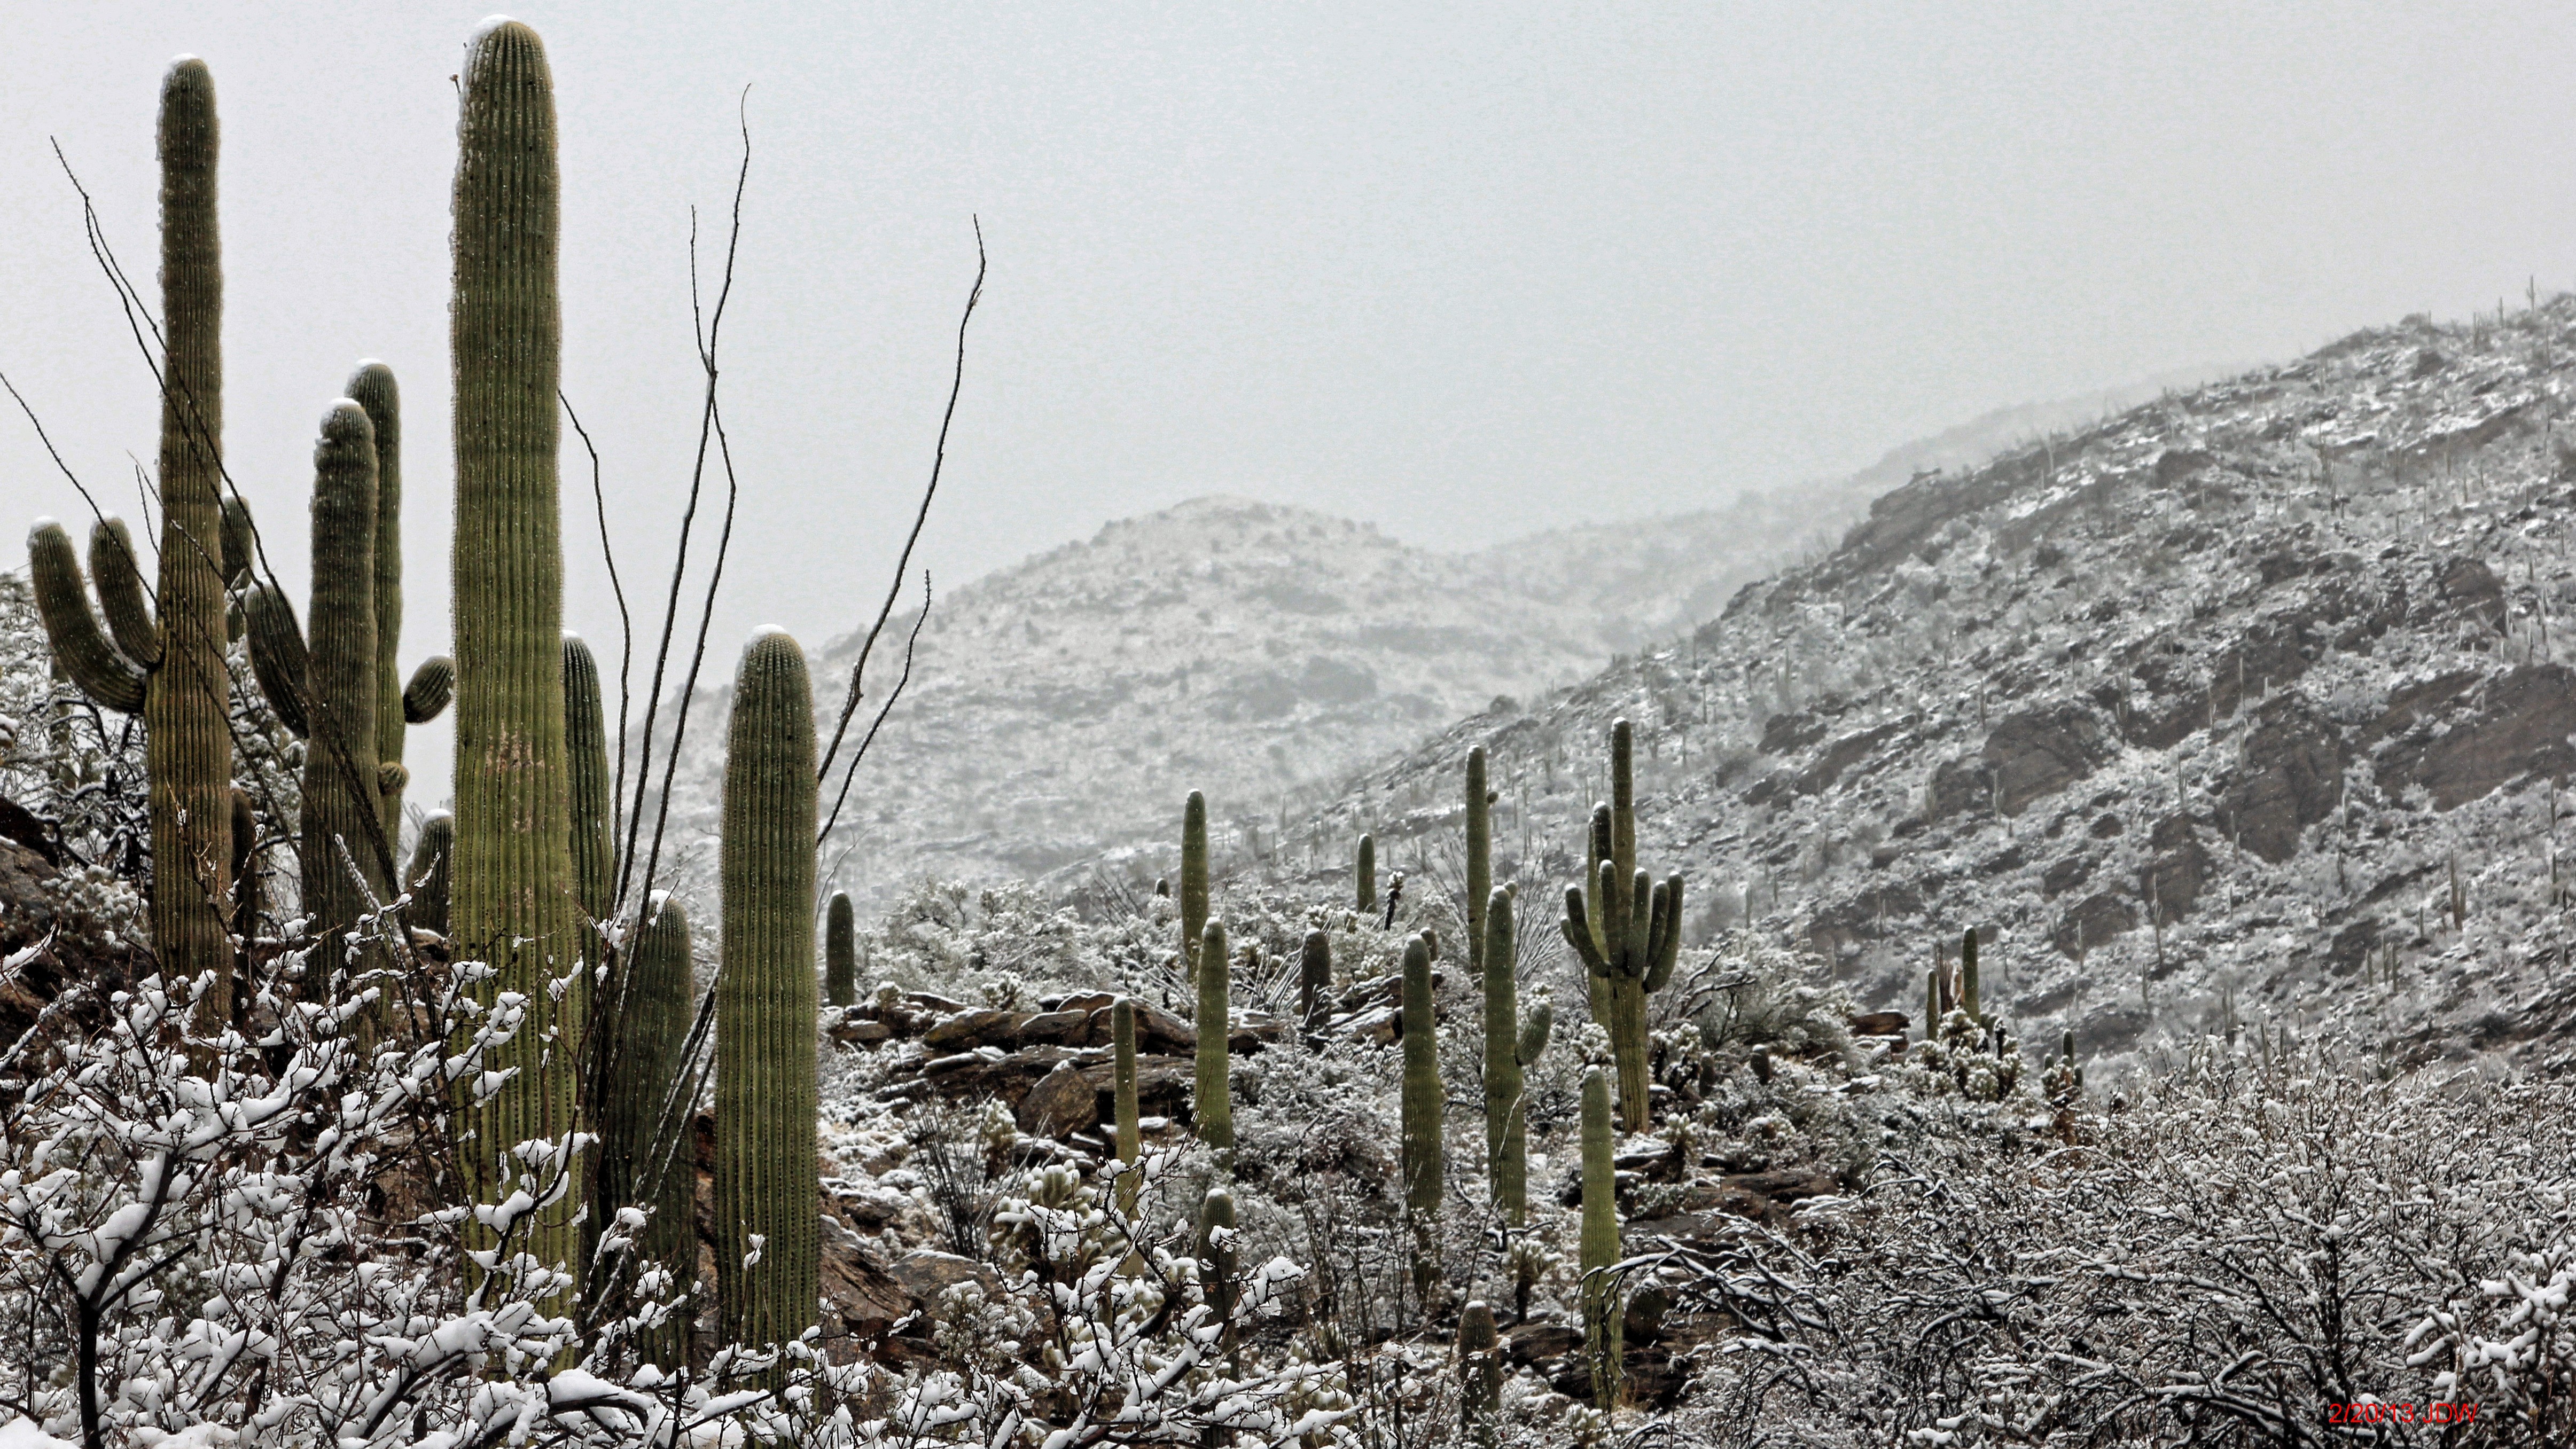 Rare Sight of snow in Saguaro National Park East Visitor Center (Rincon Mountain District)